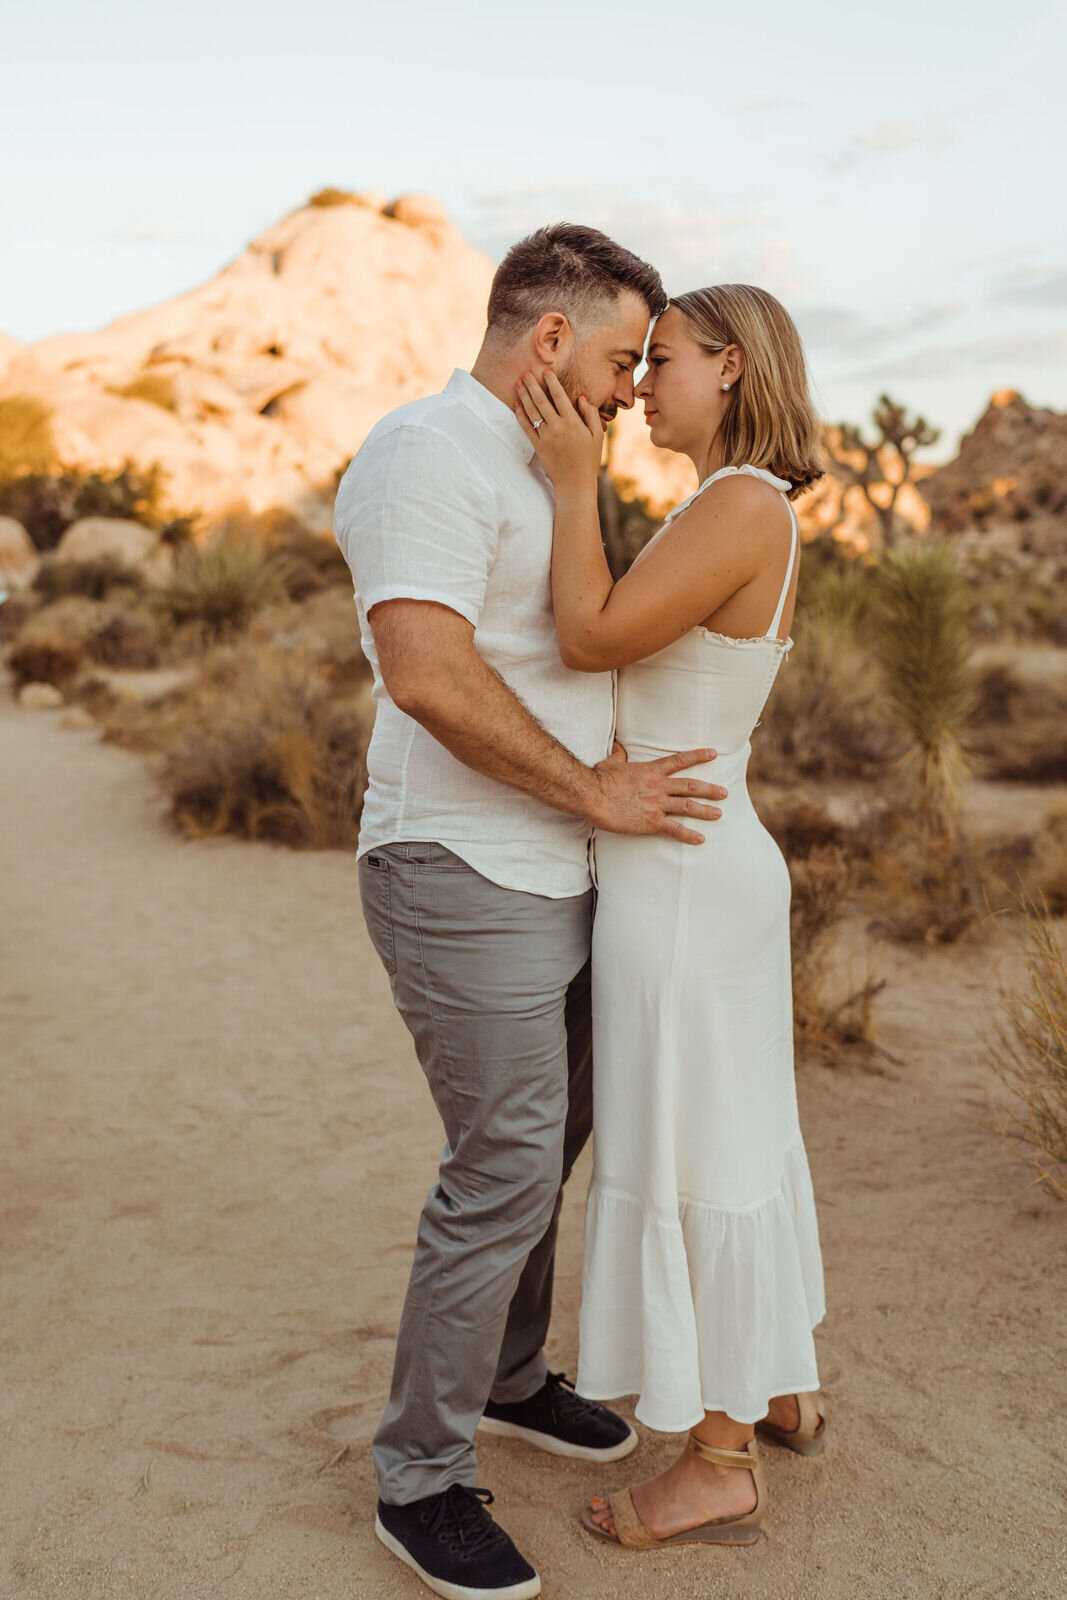 Sunrise Summer Engagement Session - Neutral Photoshoot Outfits - Dark and Moody Engagement Photos by adventurous Joshua Tree Wedding and Elopement Photographer Kept Record | www.keptrecord.com